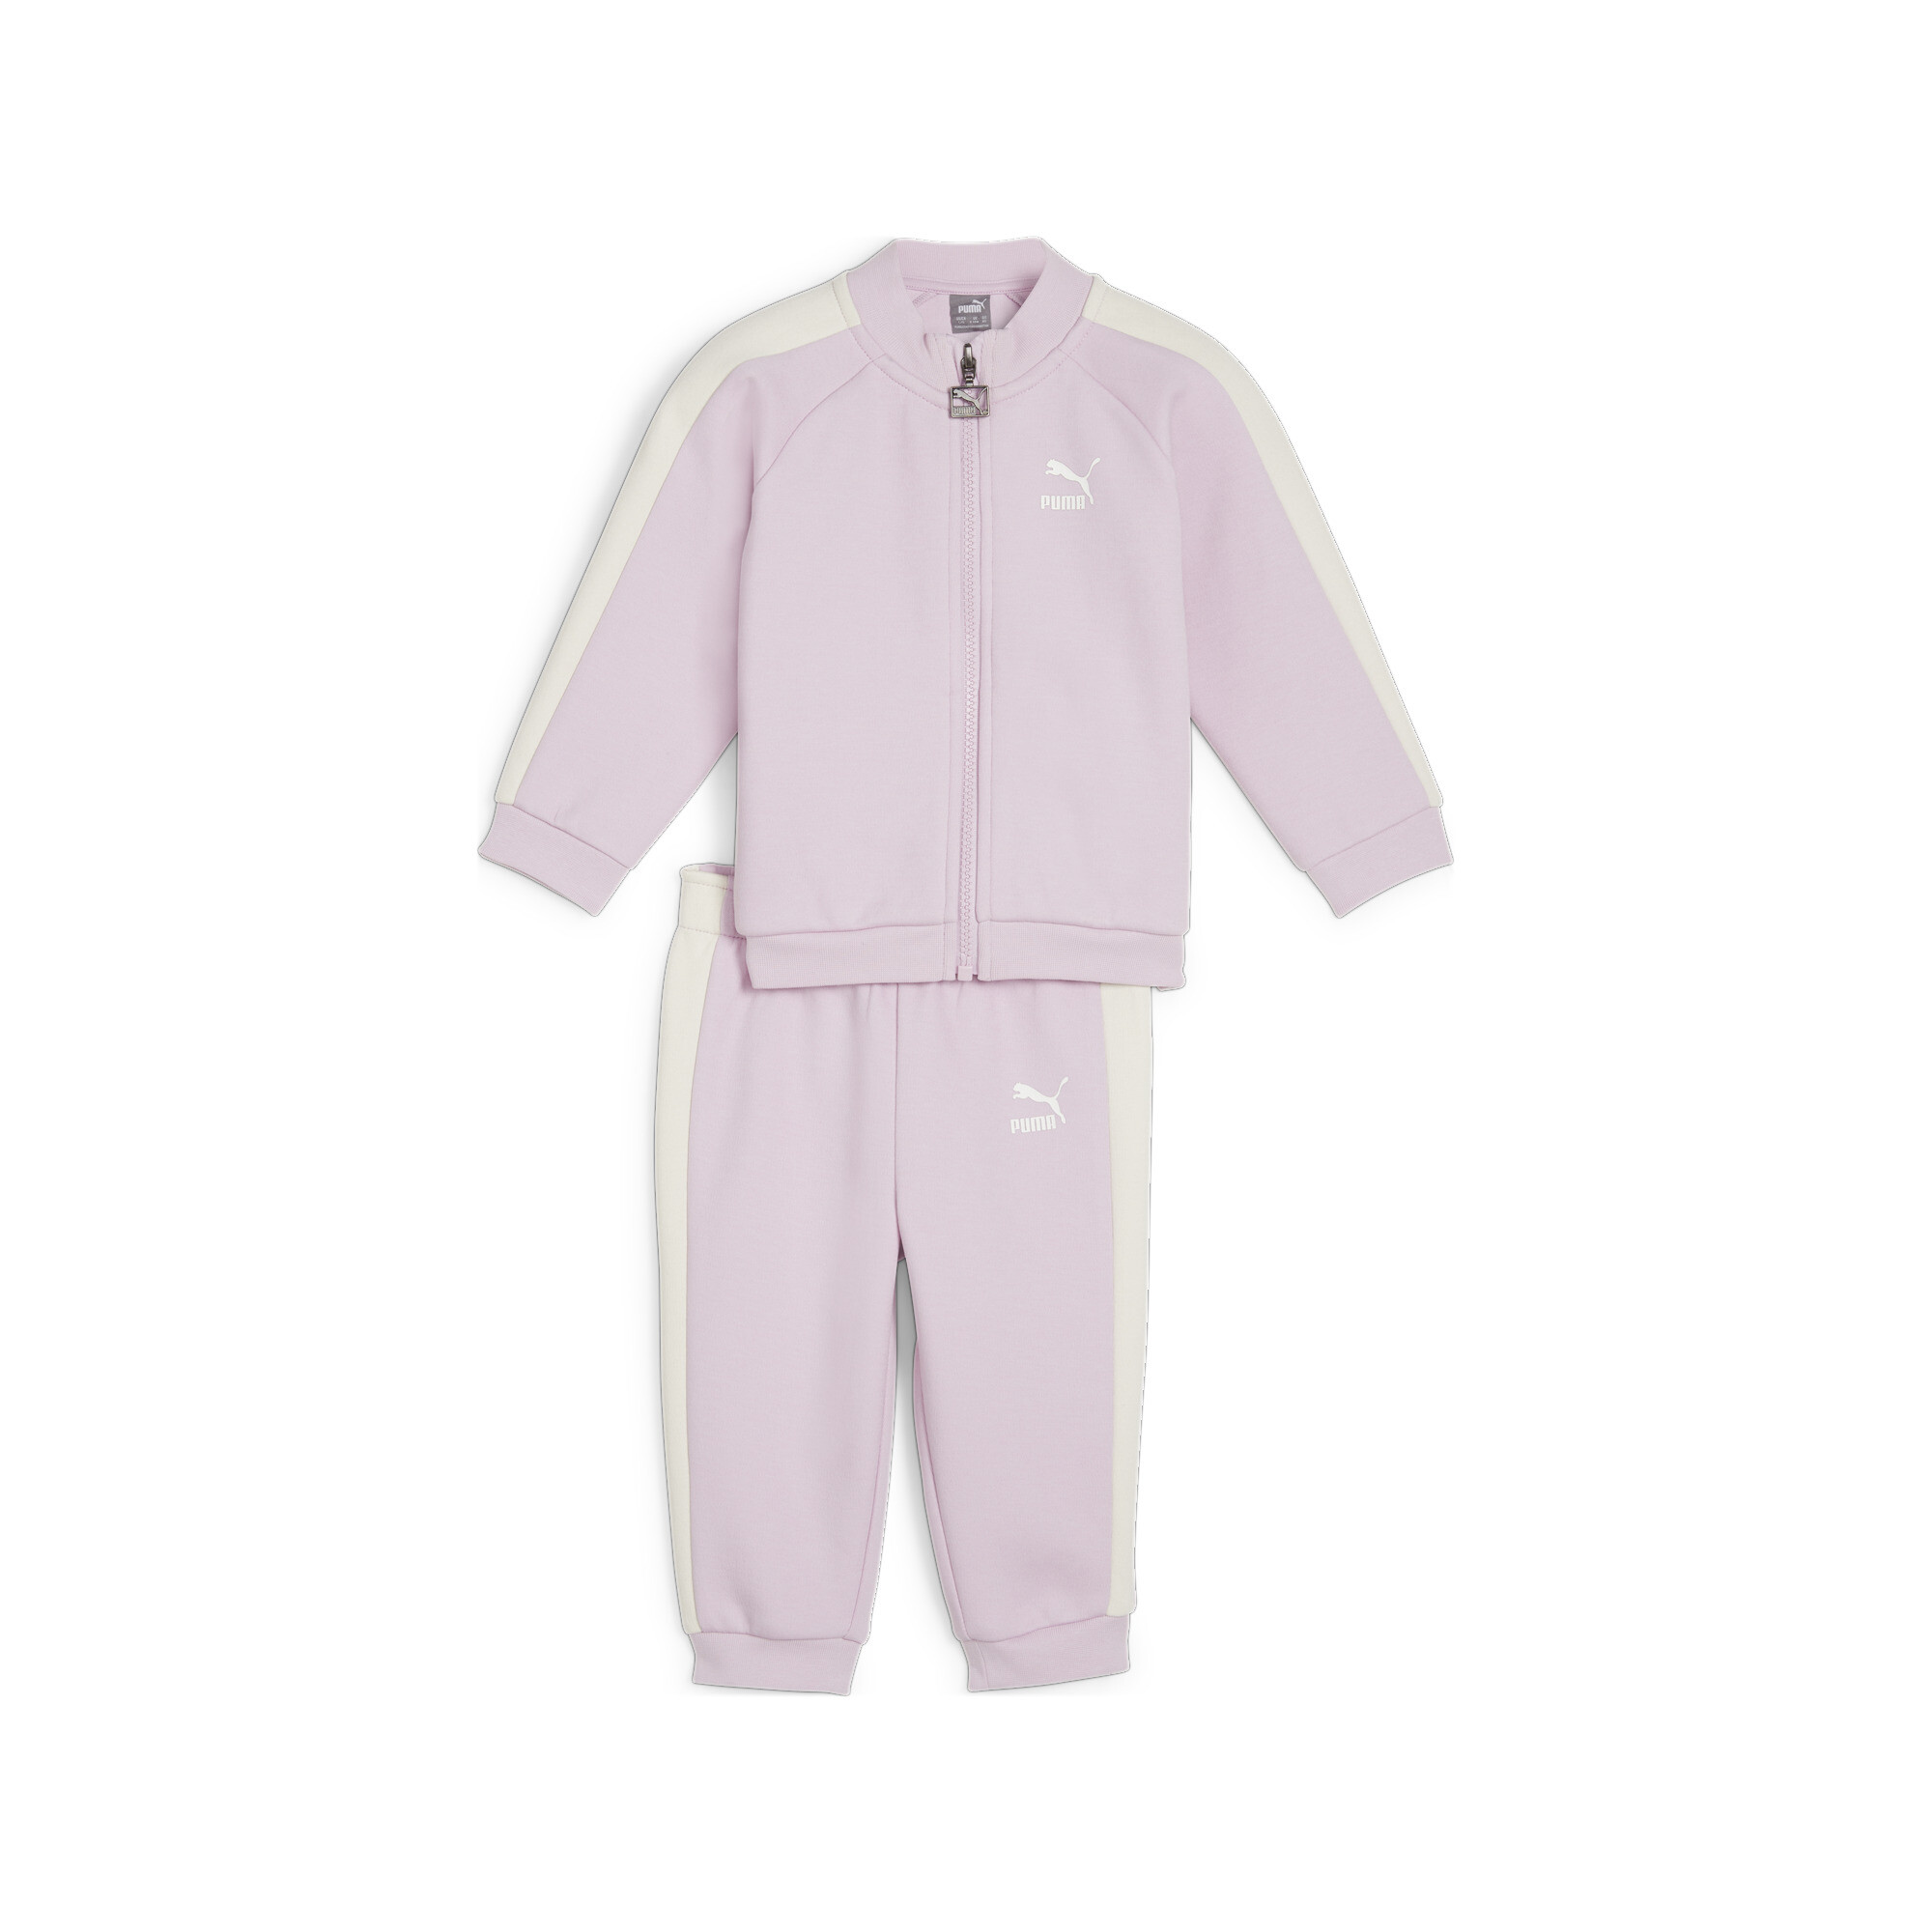 Kids' PUMA MINICATS T7 ICONIC Baby Tracksuit Set In Purple, Size 9-12 Months